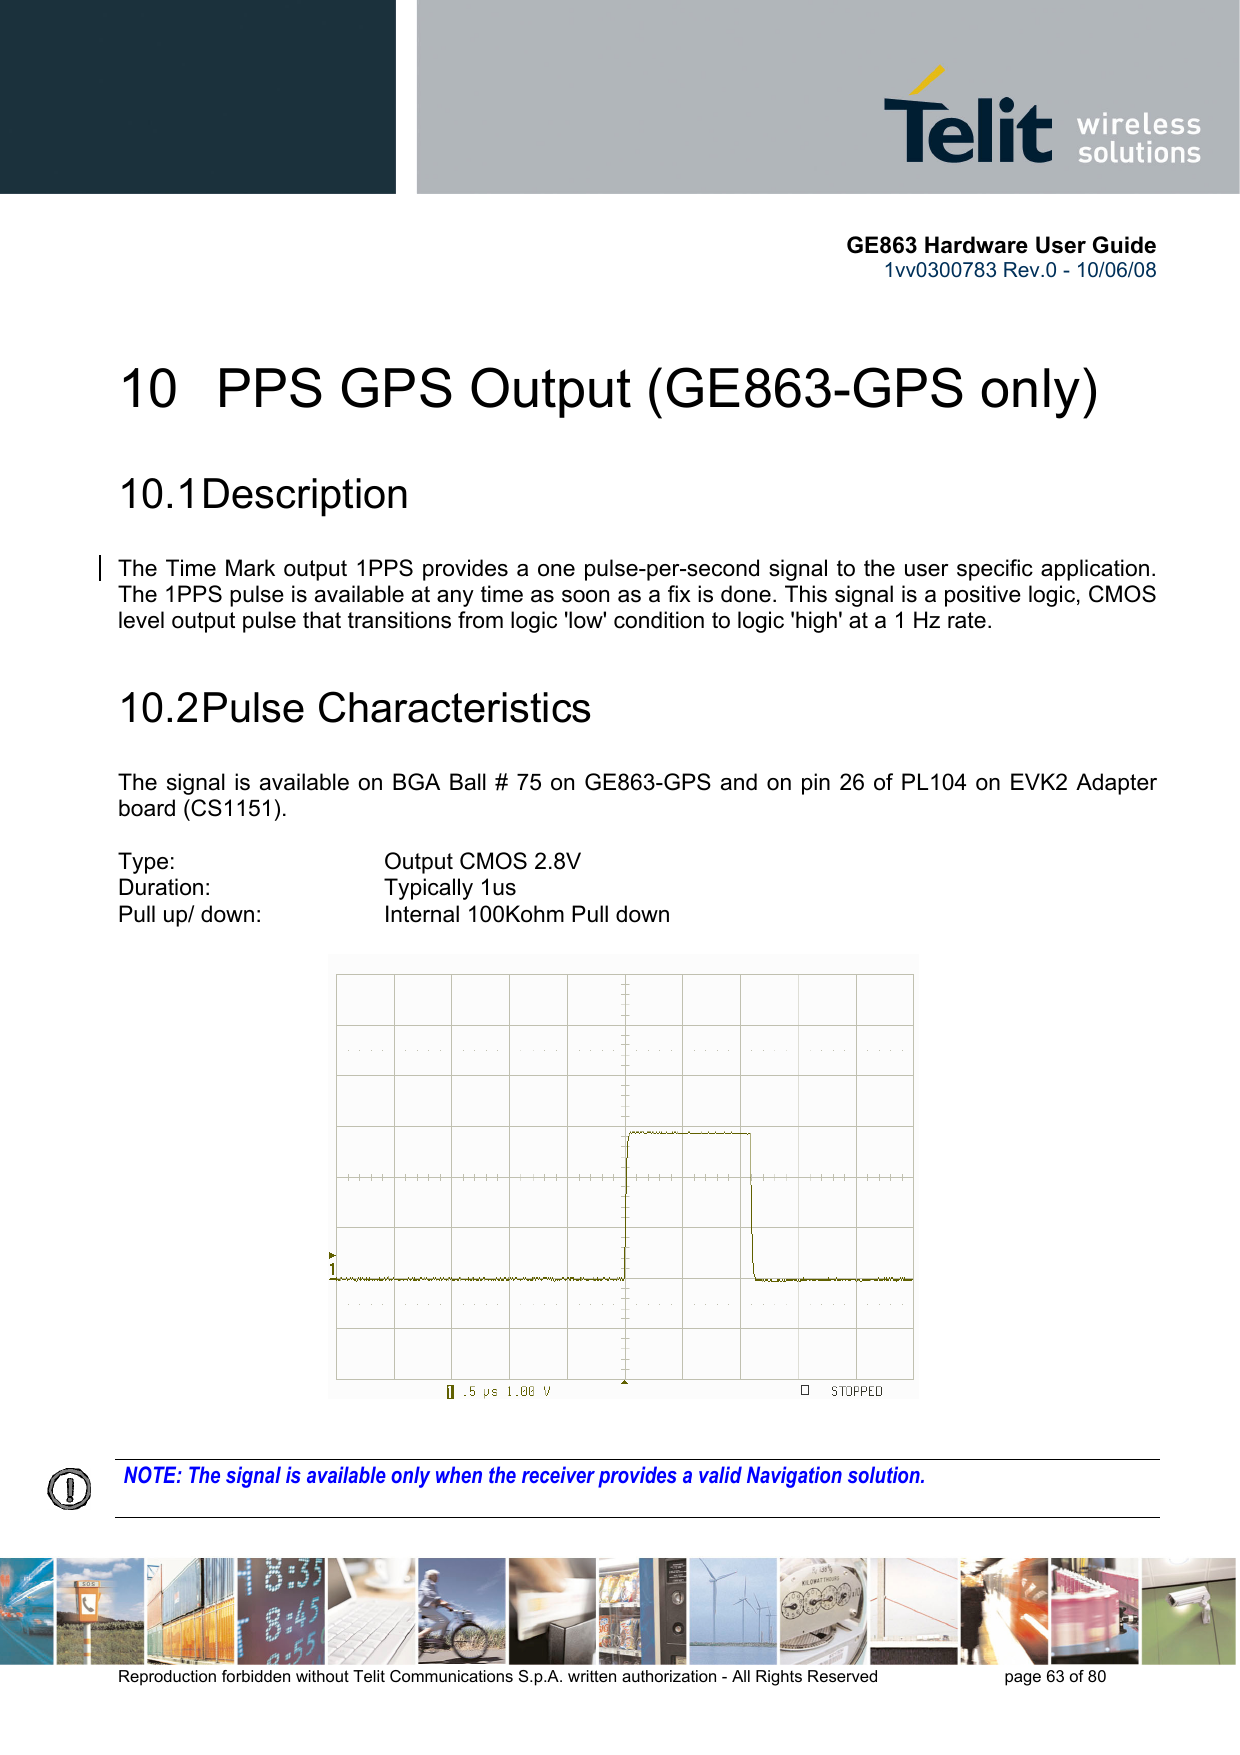       GE863 Hardware User Guide 1vv0300783 Rev.0 - 10/06/08 Reproduction forbidden without Telit Communications S.p.A. written authorization - All Rights Reserved    page 63 of 80  10   PPS GPS Output (GE863-GPS only) 10.1 Description The Time Mark output 1PPS provides a one pulse-per-second signal to the user specific application.  The 1PPS pulse is available at any time as soon as a fix is done. This signal is a positive logic, CMOS level output pulse that transitions from logic &apos;low&apos; condition to logic &apos;high&apos; at a 1 Hz rate.  10.2 Pulse  Characteristics The signal is available on BGA Ball # 75 on GE863-GPS and on pin 26 of PL104 on EVK2 Adapter board (CS1151).  Type:         Output CMOS 2.8V Duration:      Typically 1us Pull up/ down:     Internal 100Kohm Pull down                 NOTE: The signal is available only when the receiver provides a valid Navigation solution.  